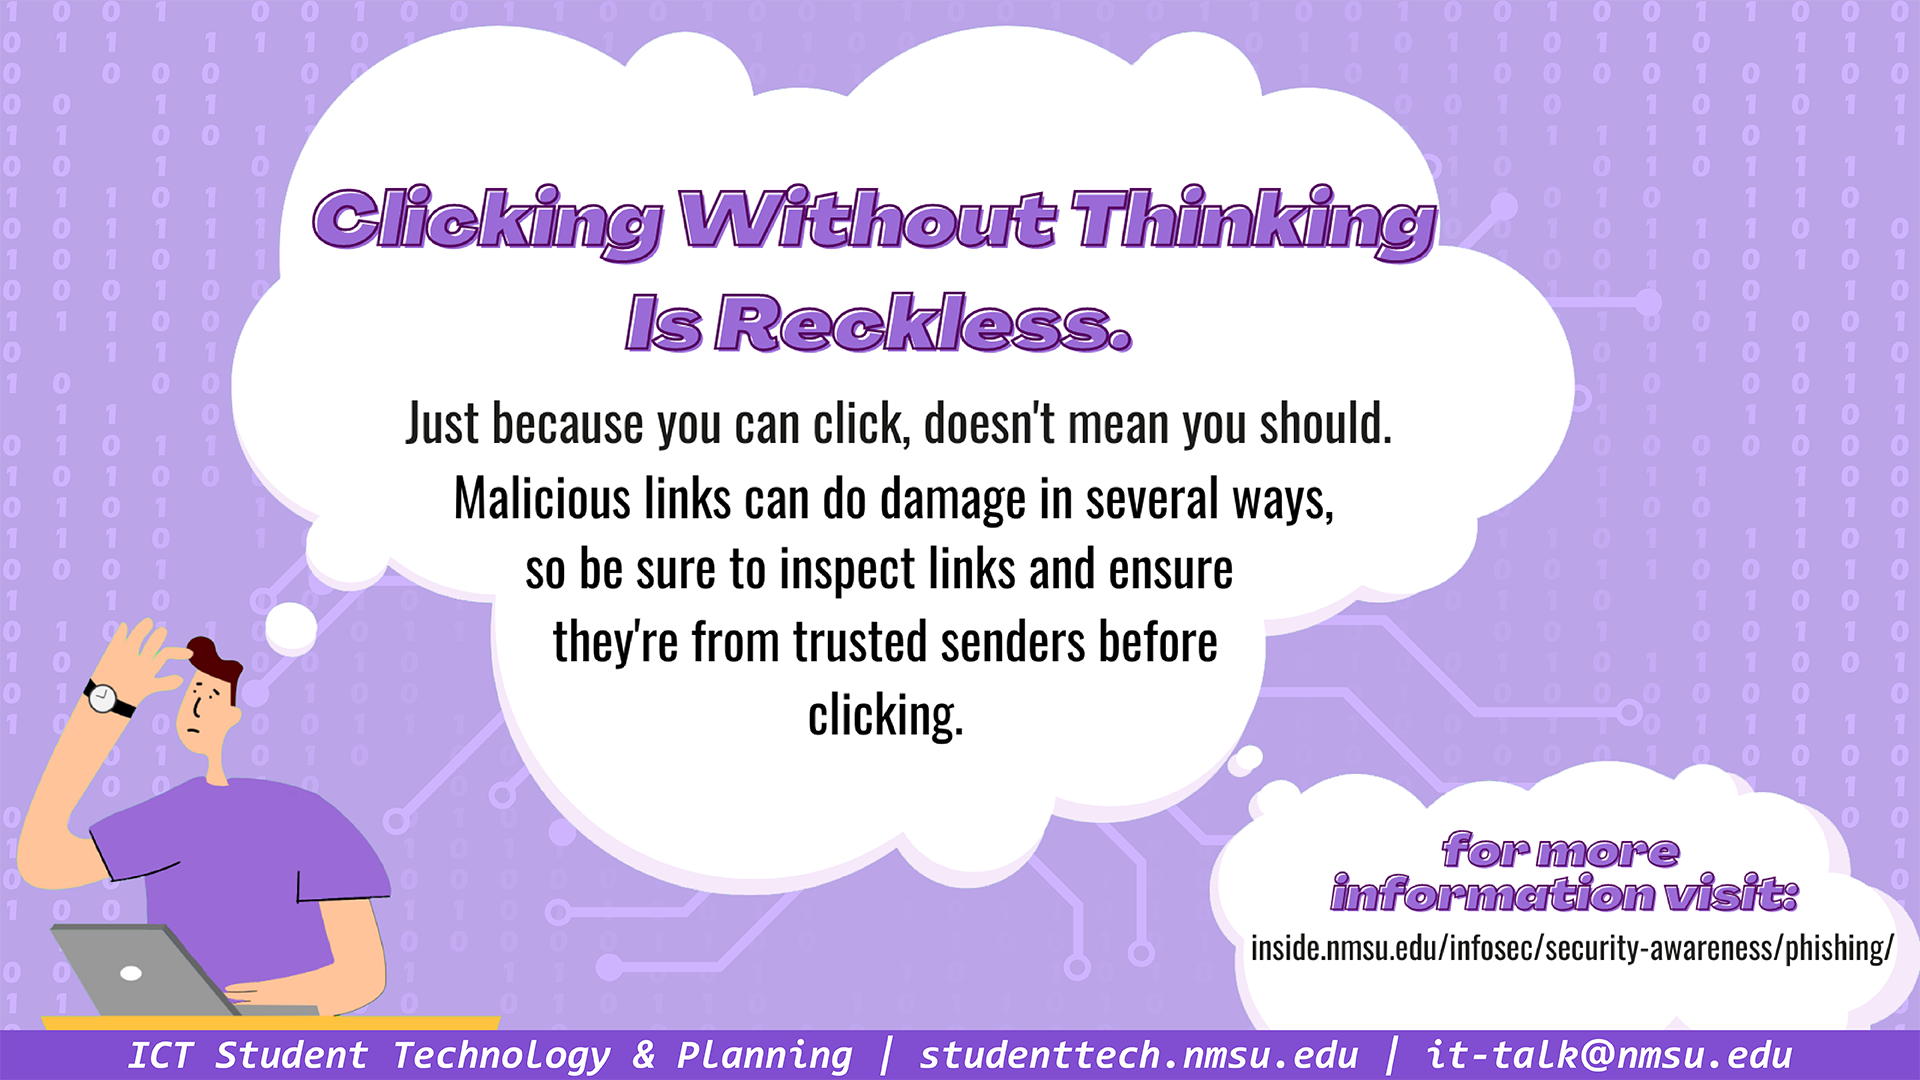 Clicking without thinking is reckless. Just because you can click, doesn't mean you should. Malicious links can do damage in several ways, so be sure to inspect links and ensure they're from trusted senders before clicking. For more info, visit infosec.nmsu.edu/security-awareness/phishing.